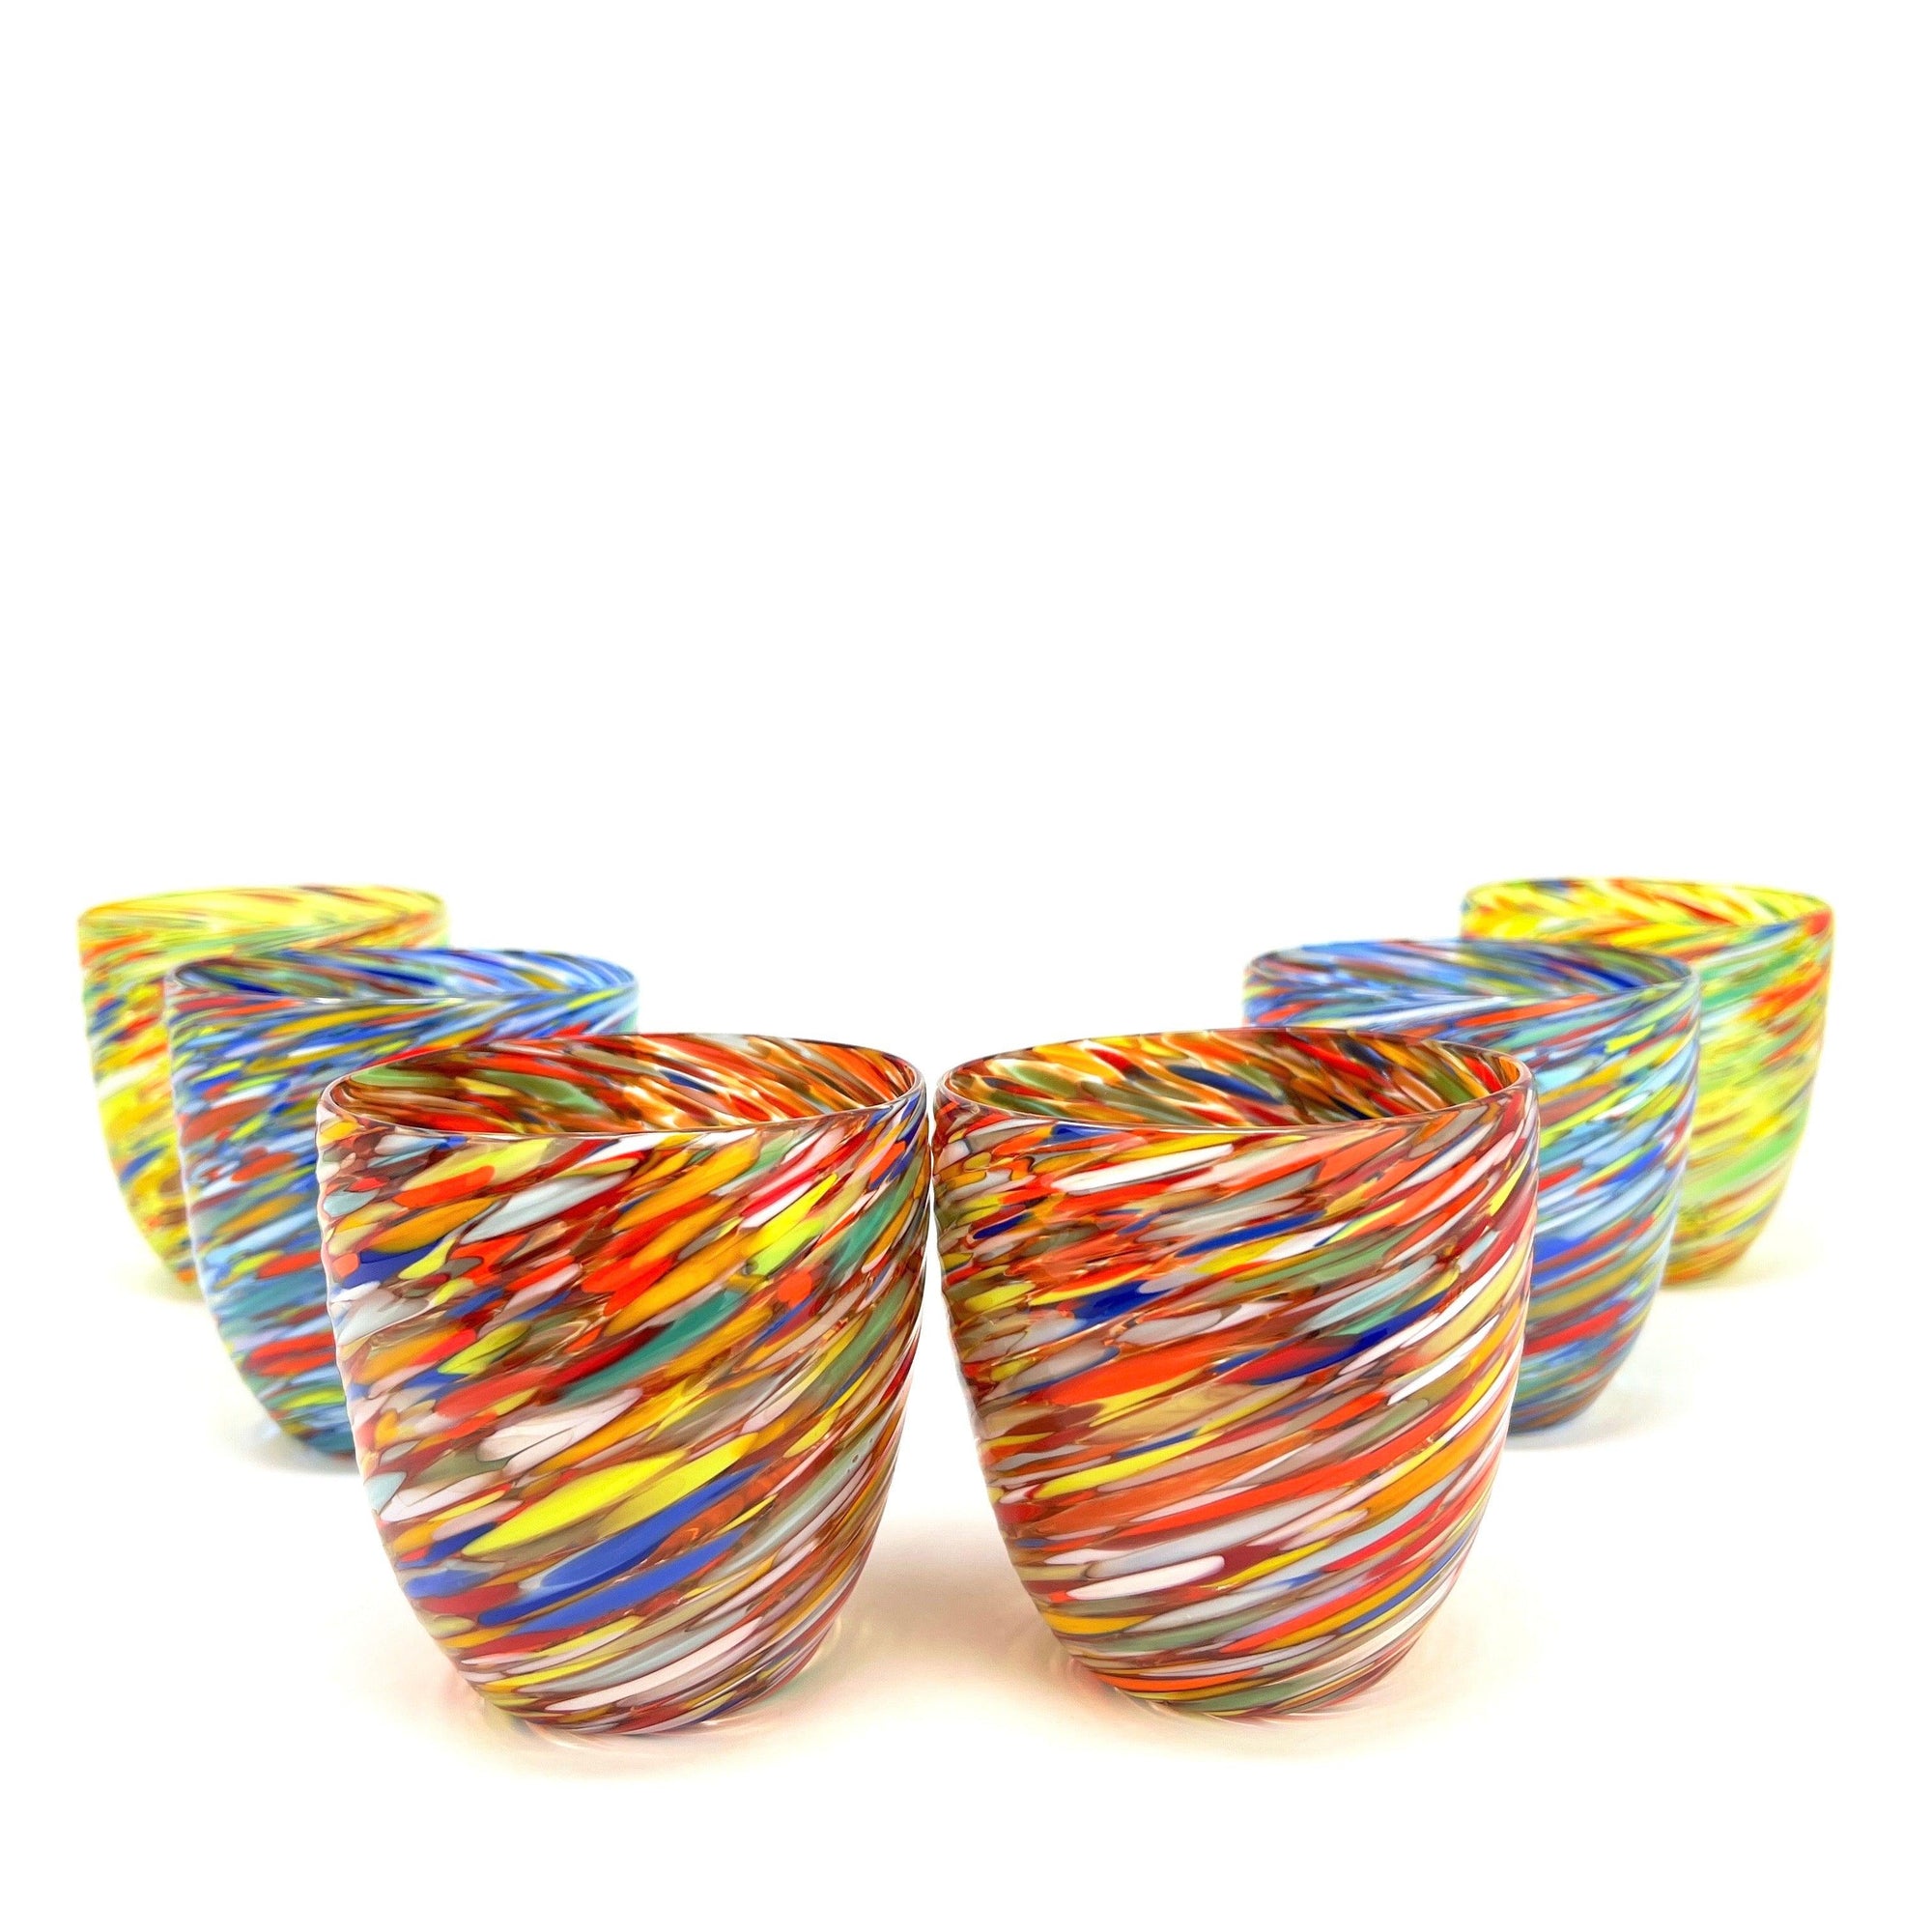 Twist Short Drinking Glasses, Multi-Colored, Made in Murano, Italy at MyItalianDecor